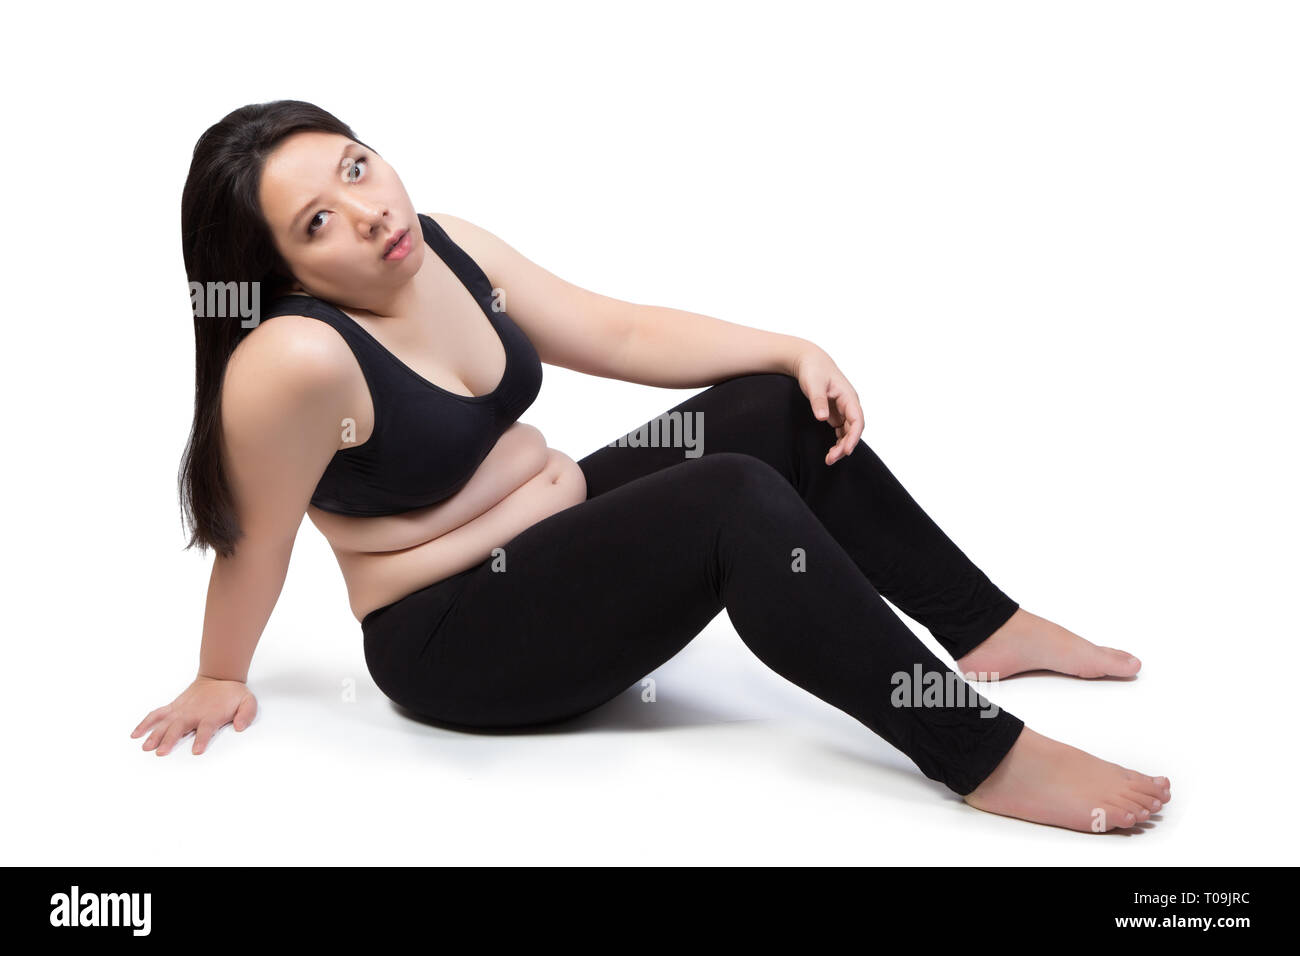 lazy fat woman bored face tired exhausted to exercise weight loss sitting on ground isolated on white background Stock Photo